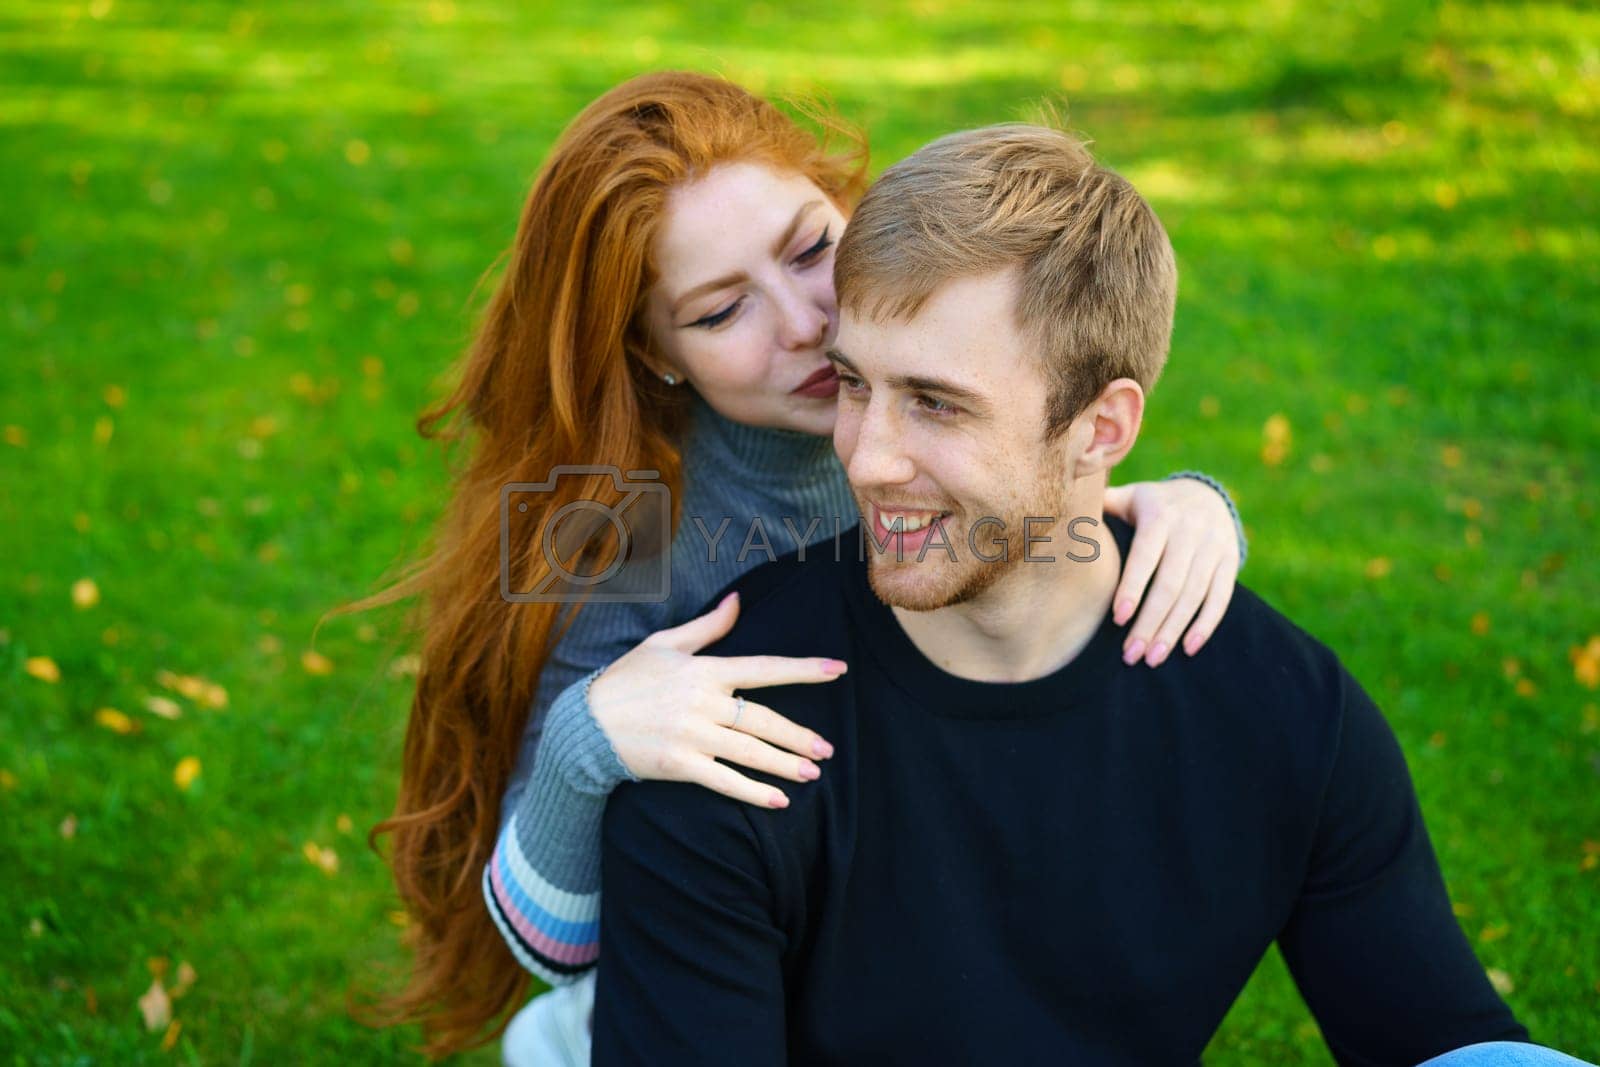 Royalty free image of Cheerful young couple in the park on the grass by EkaterinaPereslavtseva